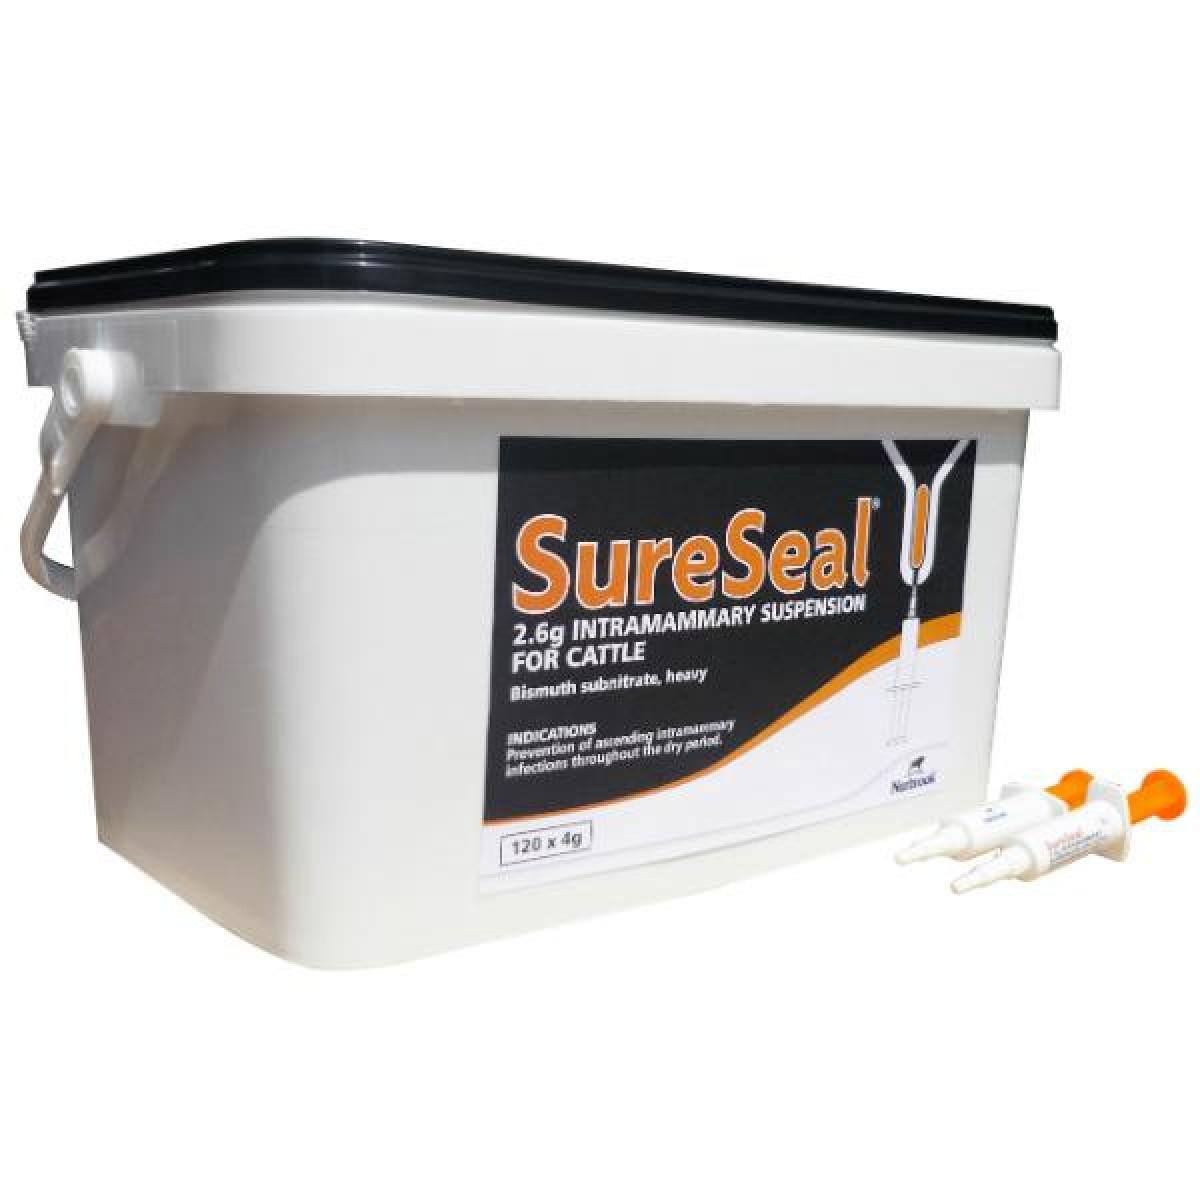 SureSeal 2.6g Intramammary Suspension for Cows